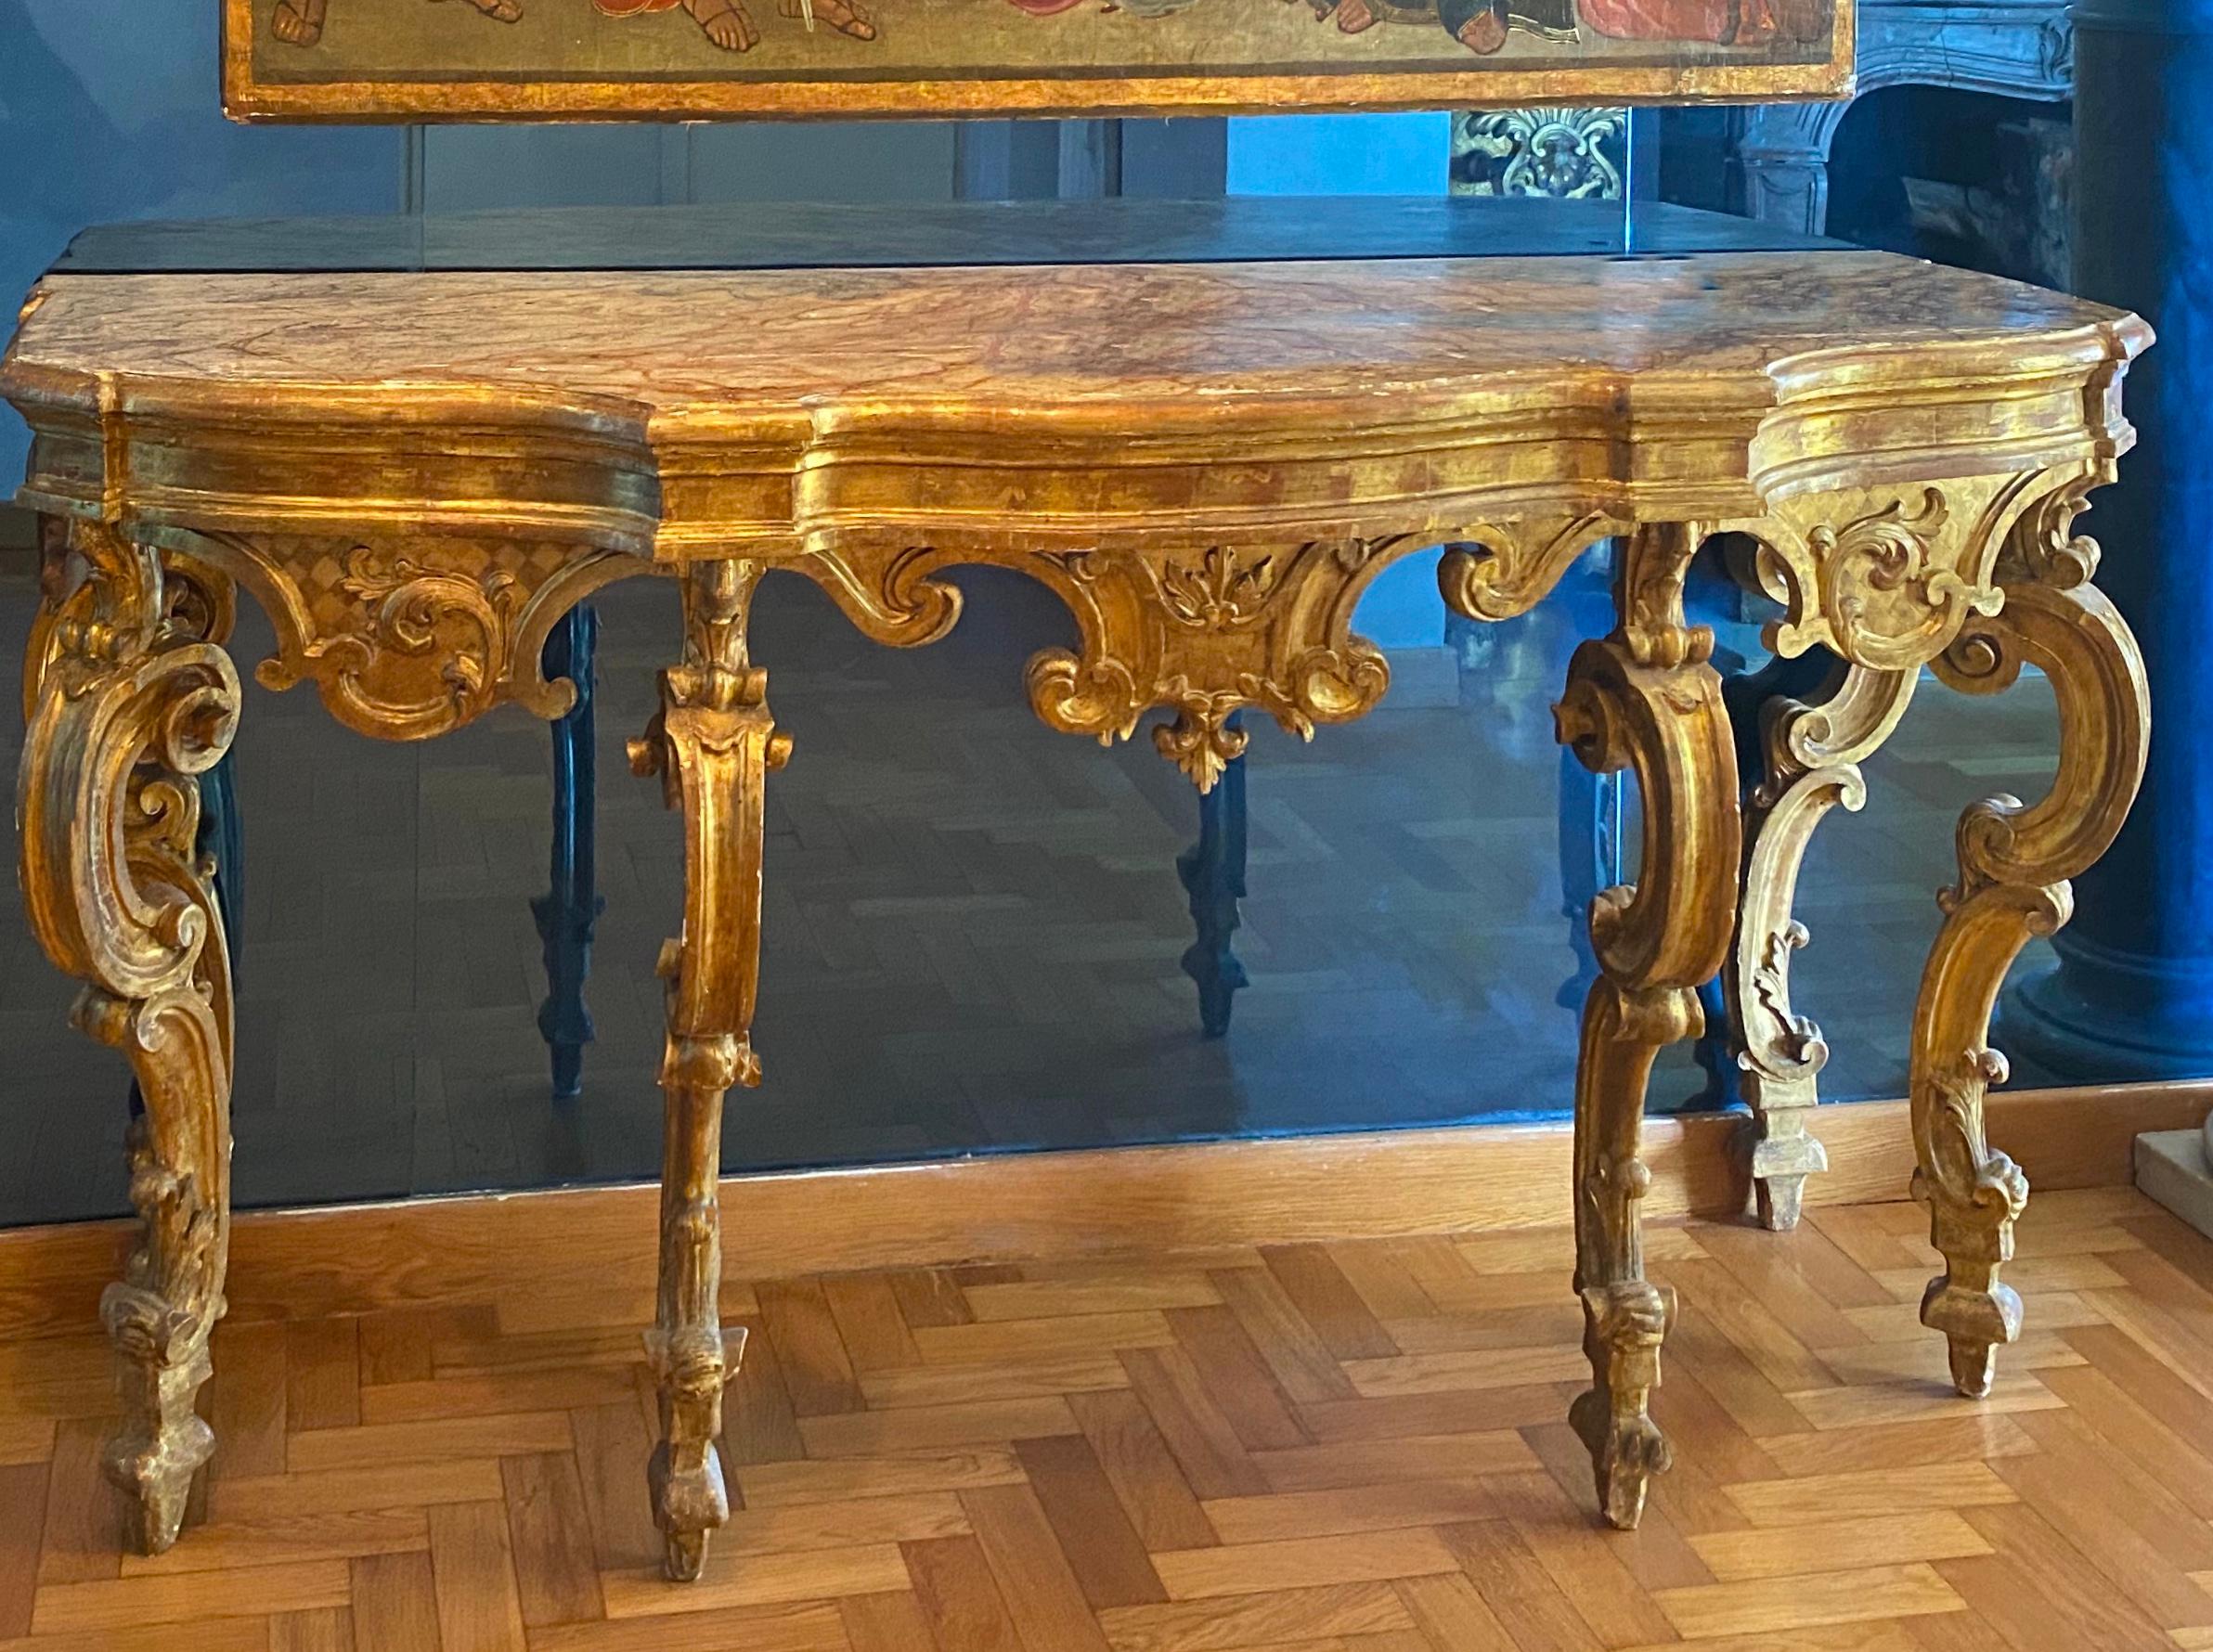 Elegant Nord Italian 18th century carved and giltwood console table with a painted faux marble top.
The table with original gilding will be fully restored before delivery.
Provenience: Leo Veneziani Collection.
Size: cm 175 x 65 x 93.